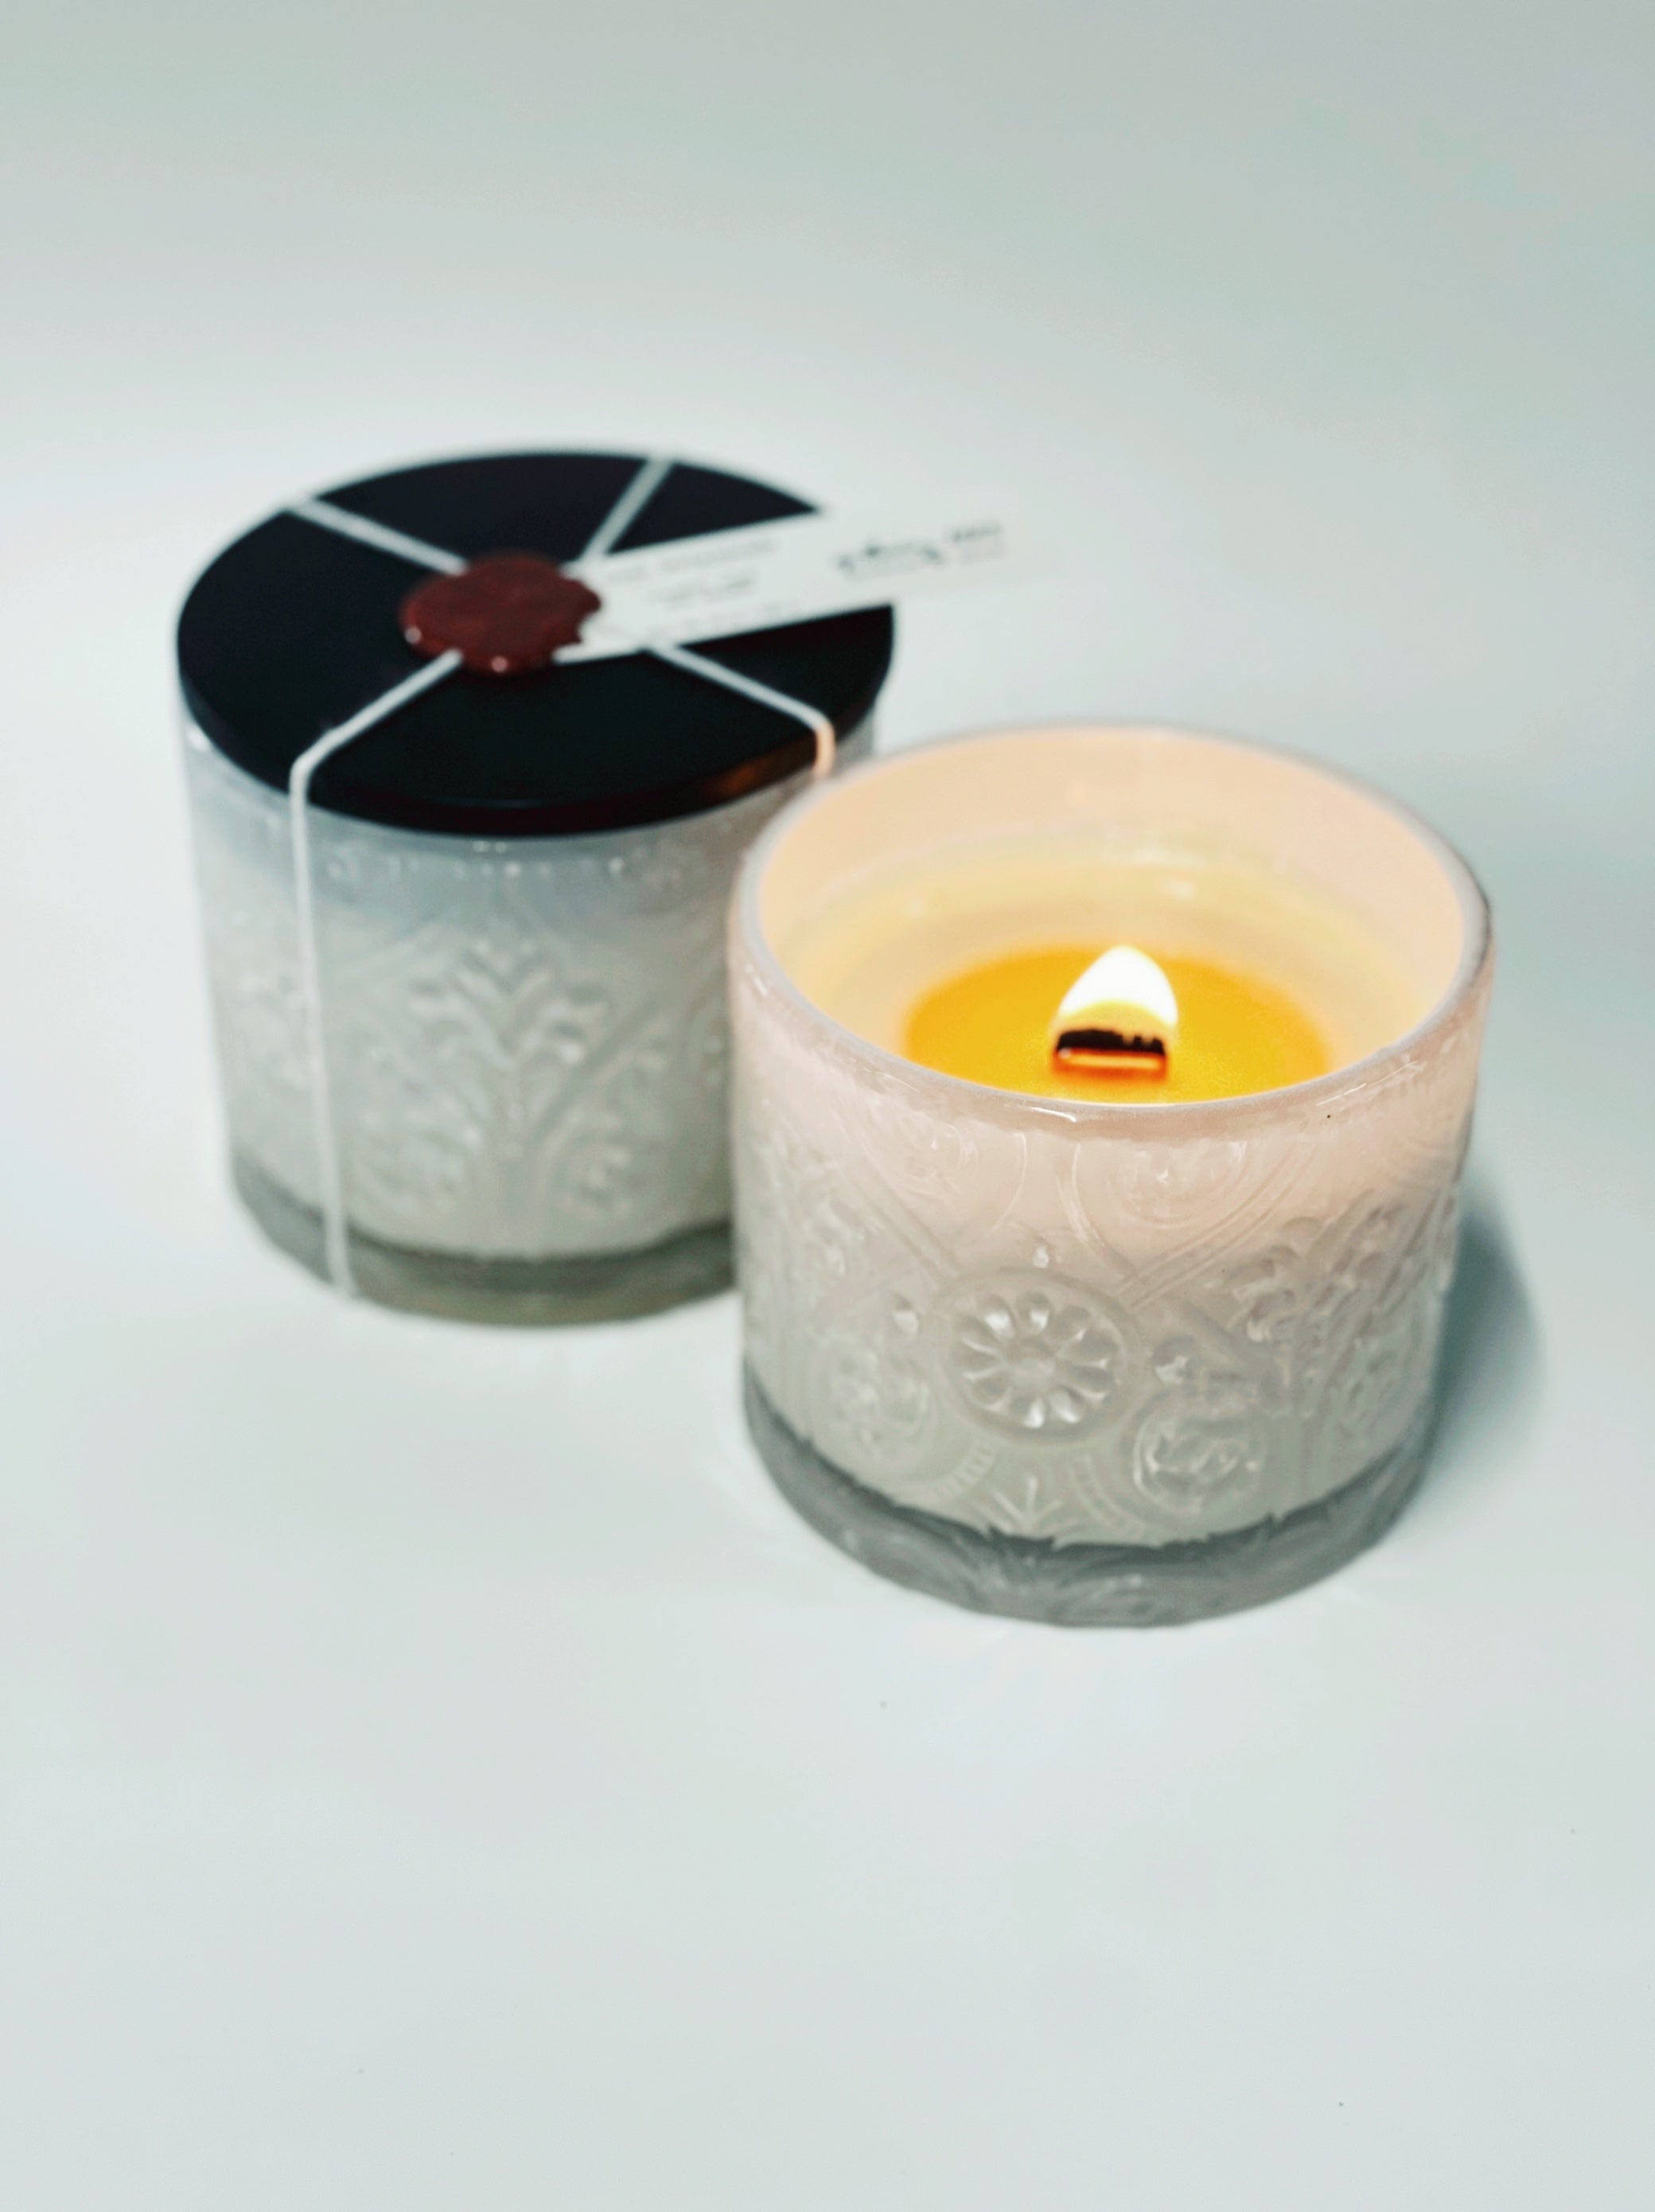 Jasmine & scented plum candle, soy wax candle, Wendi's Good Things Market